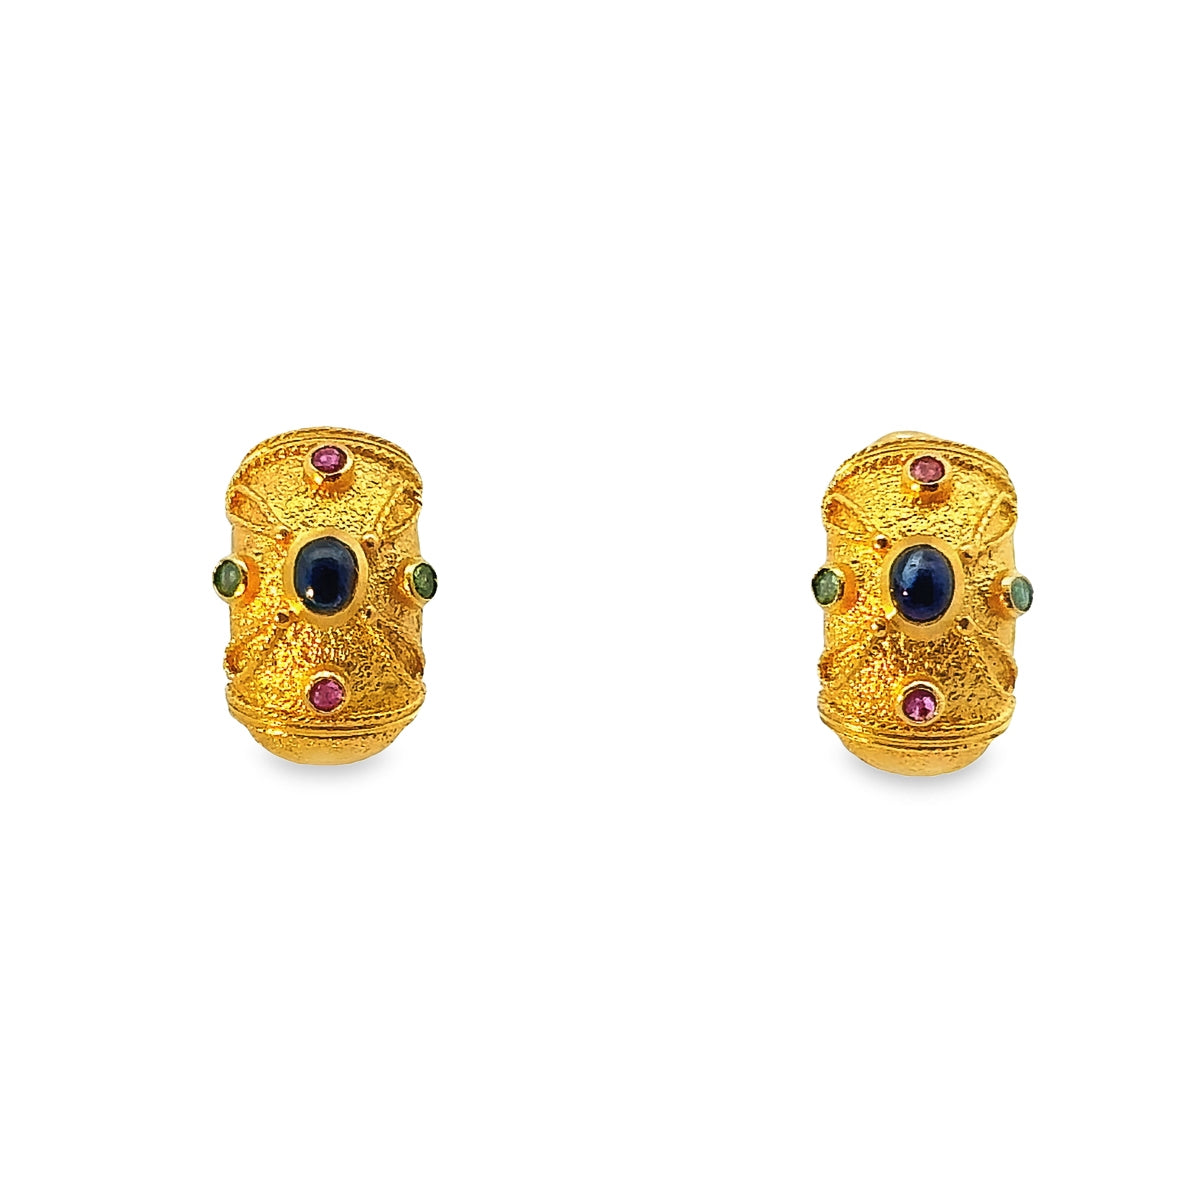 Vintage Multi-Gemstone 18K Textured Yellow Gold French-Clip Earrings